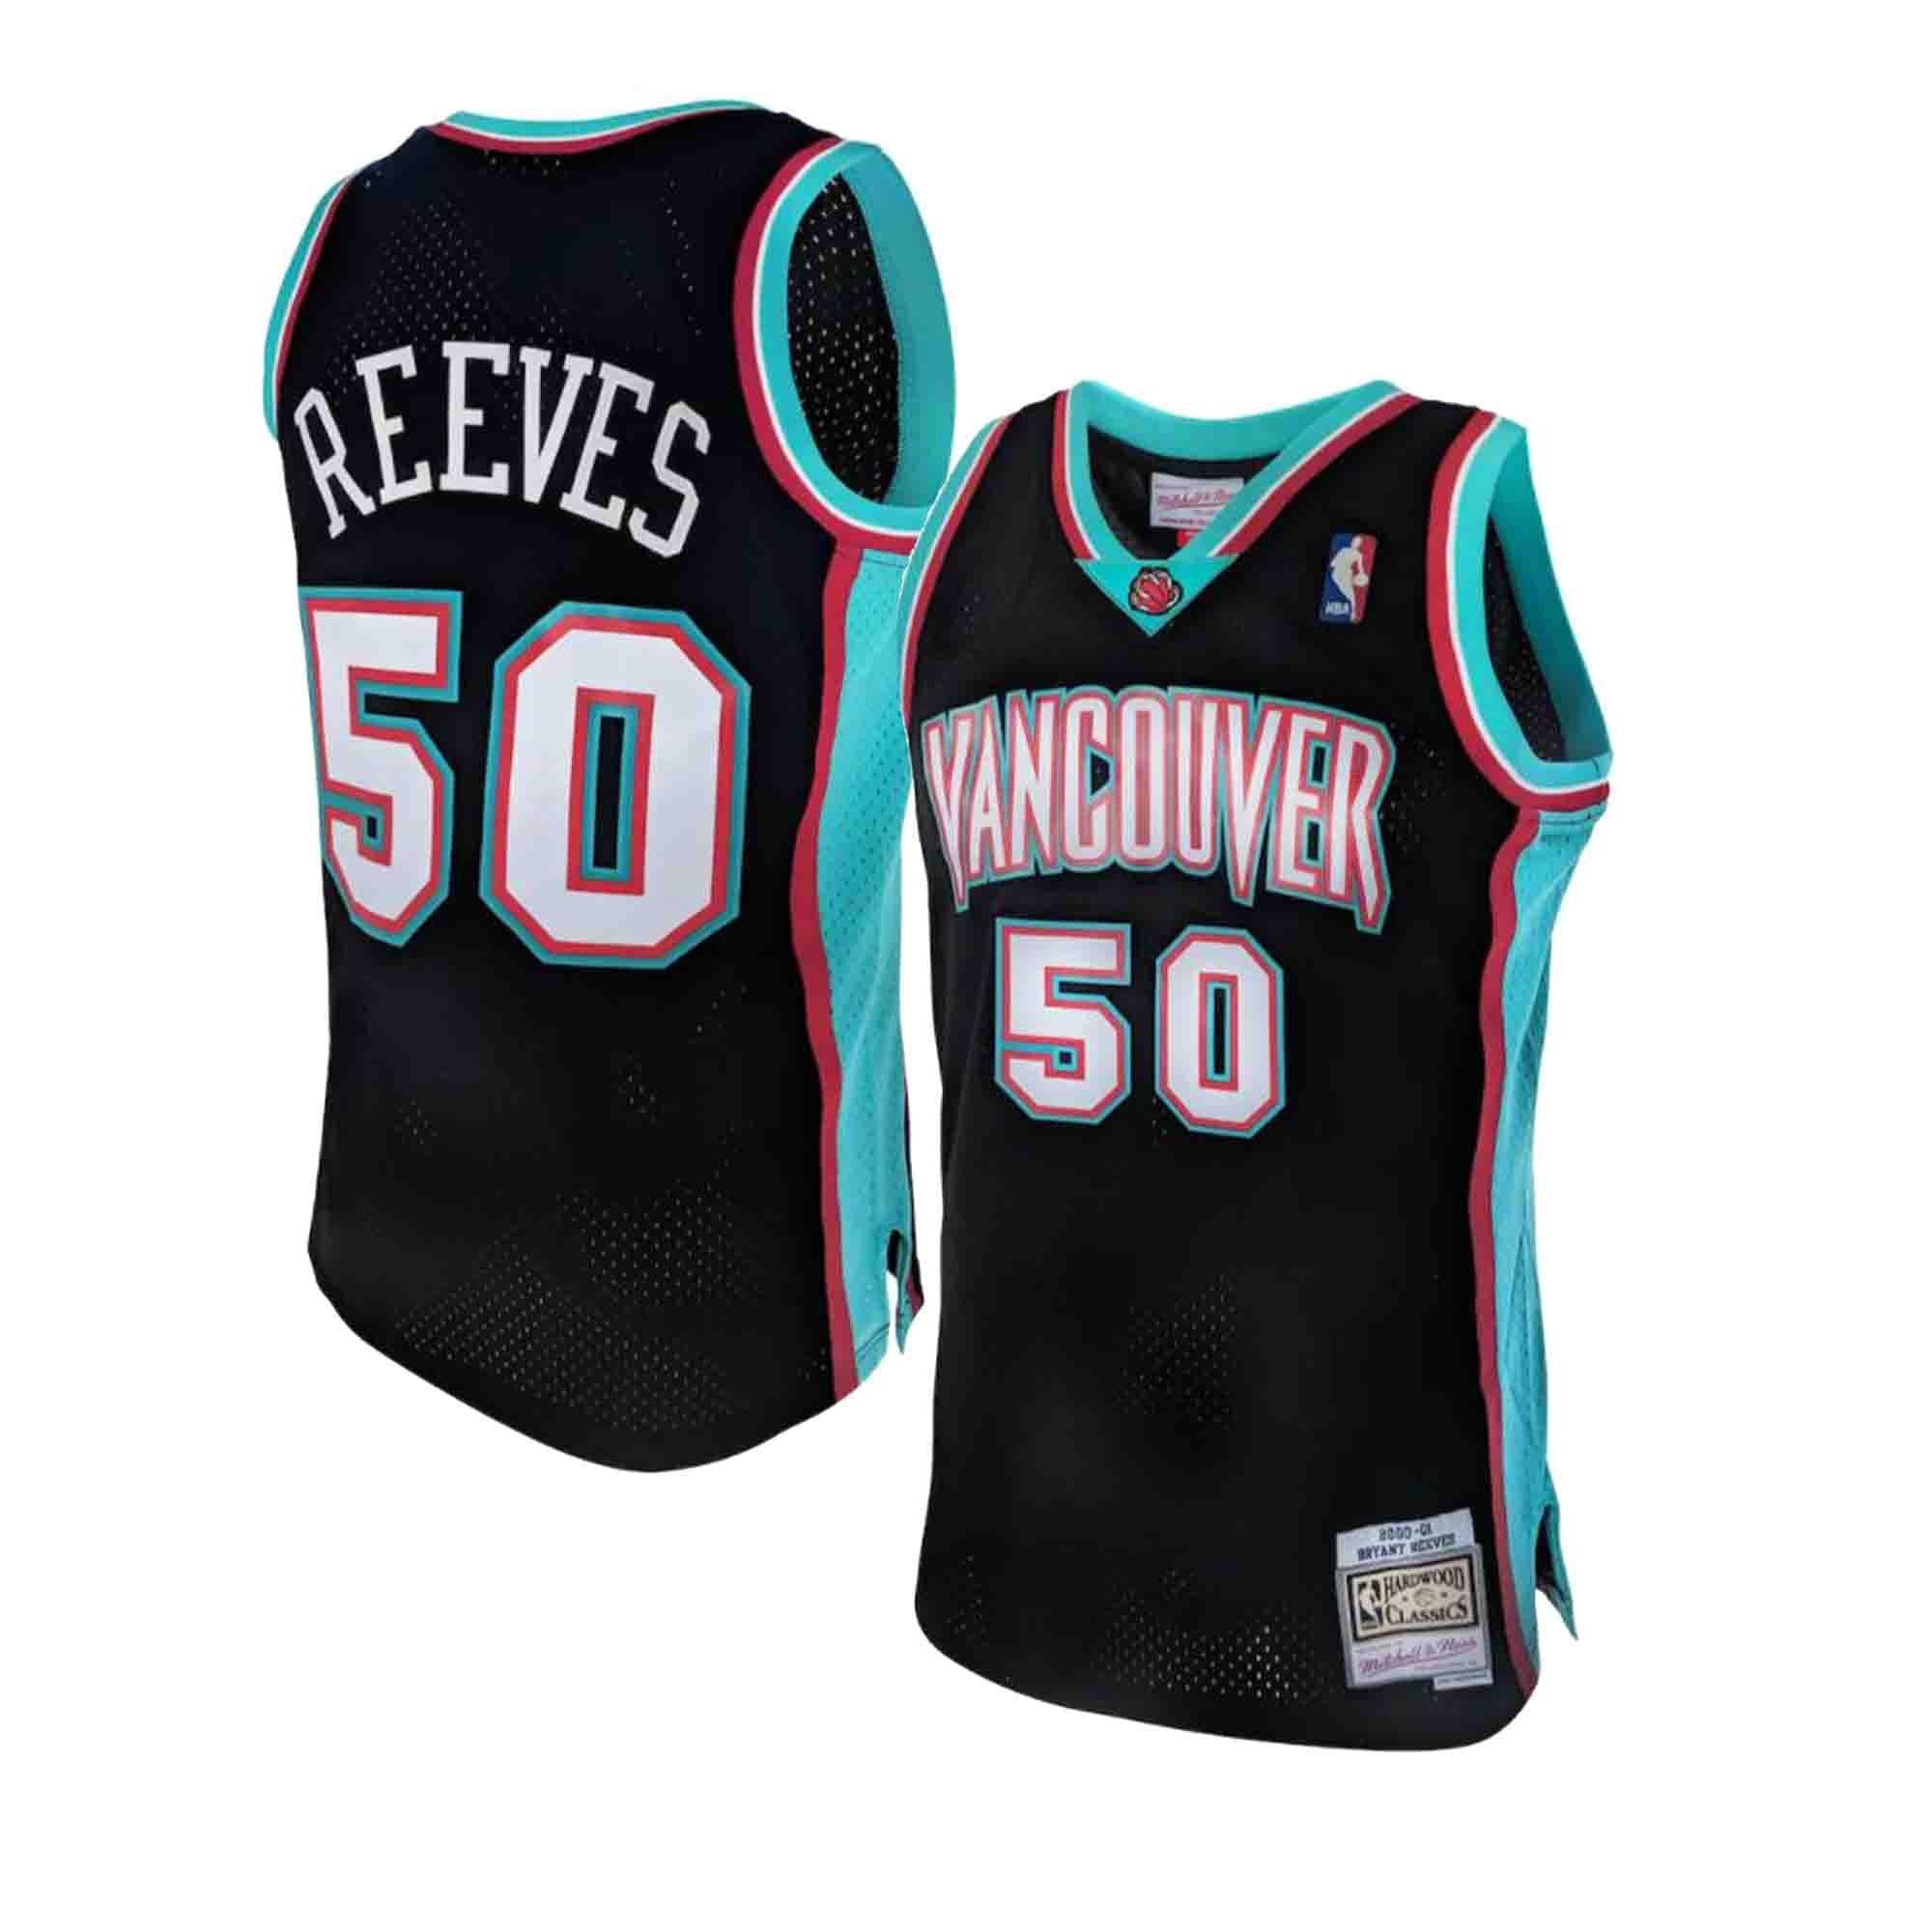 Big & Tall Authentic Green Bryant Reeves Men's Memphis Grizzlies